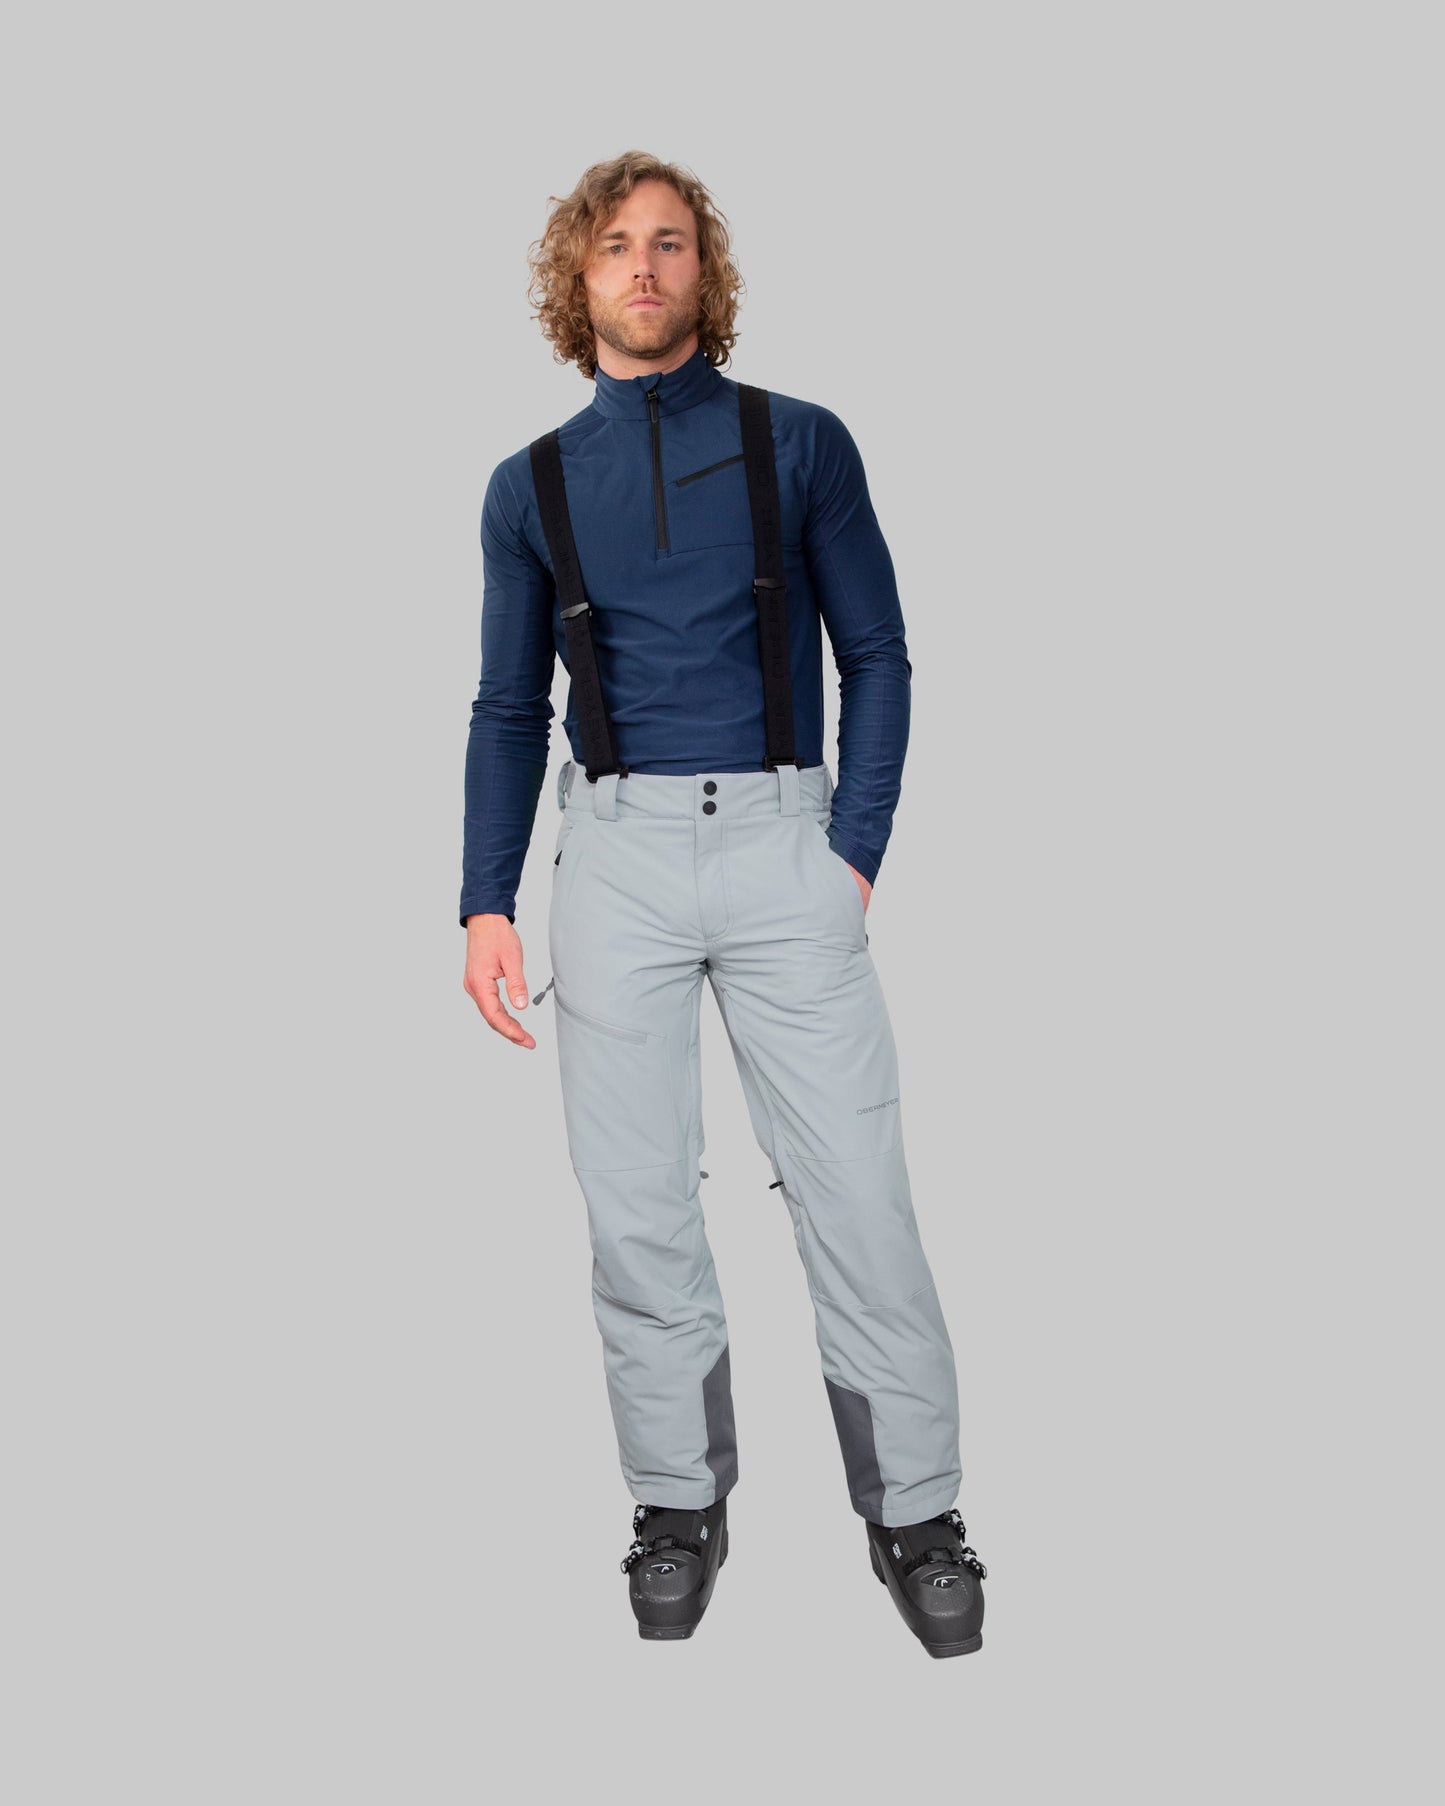 Excellent quality Obermeyer Force Suspender Pant - Admiral are